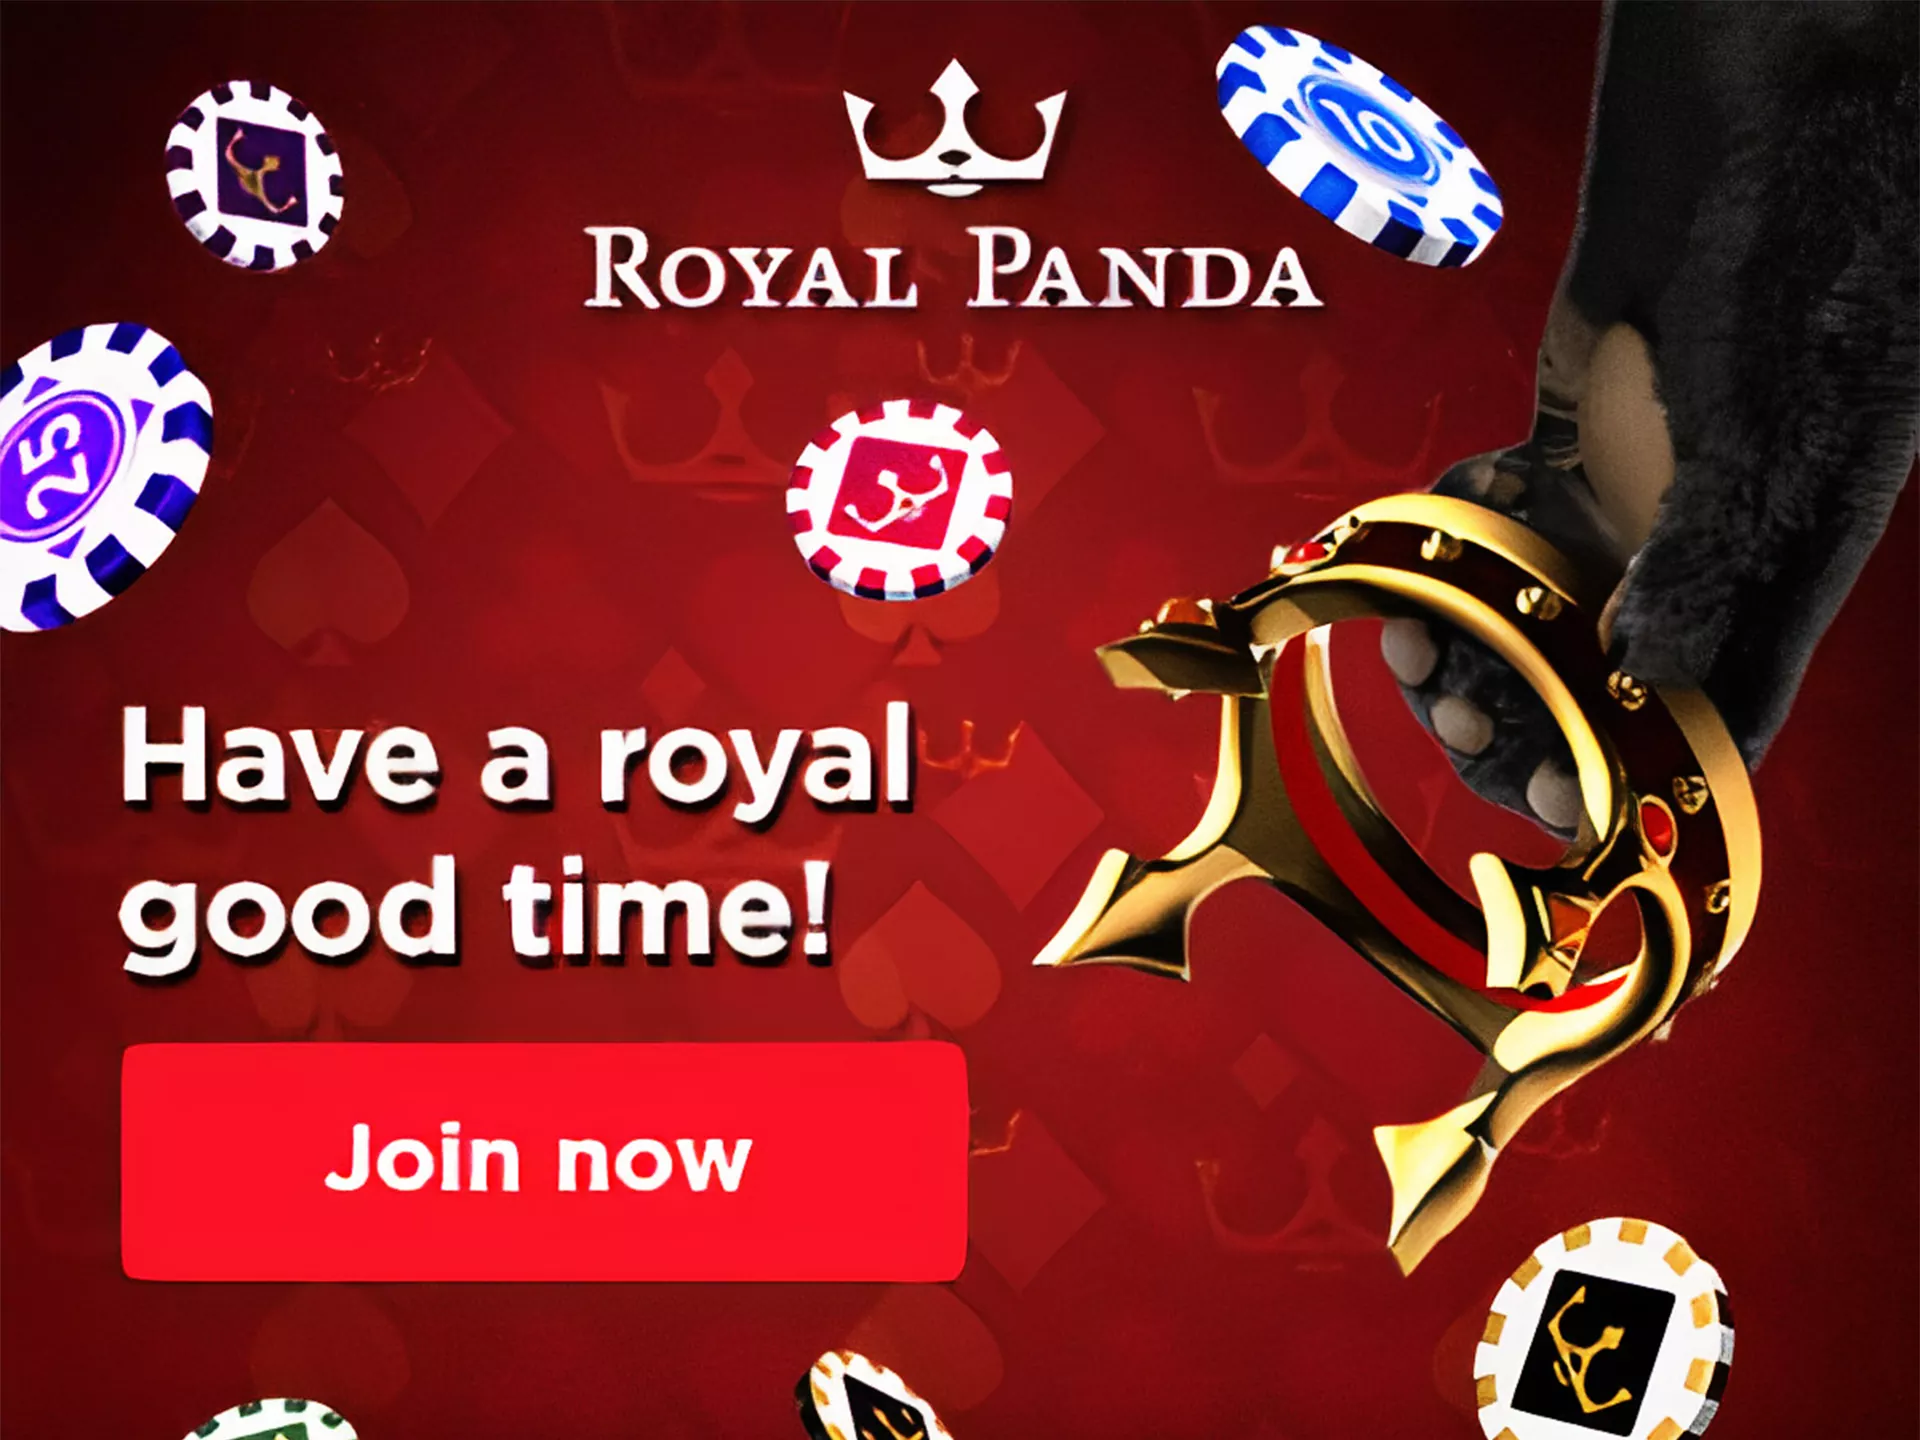 Cricket betting enthusiasts will be satisfied with Royal Panda.